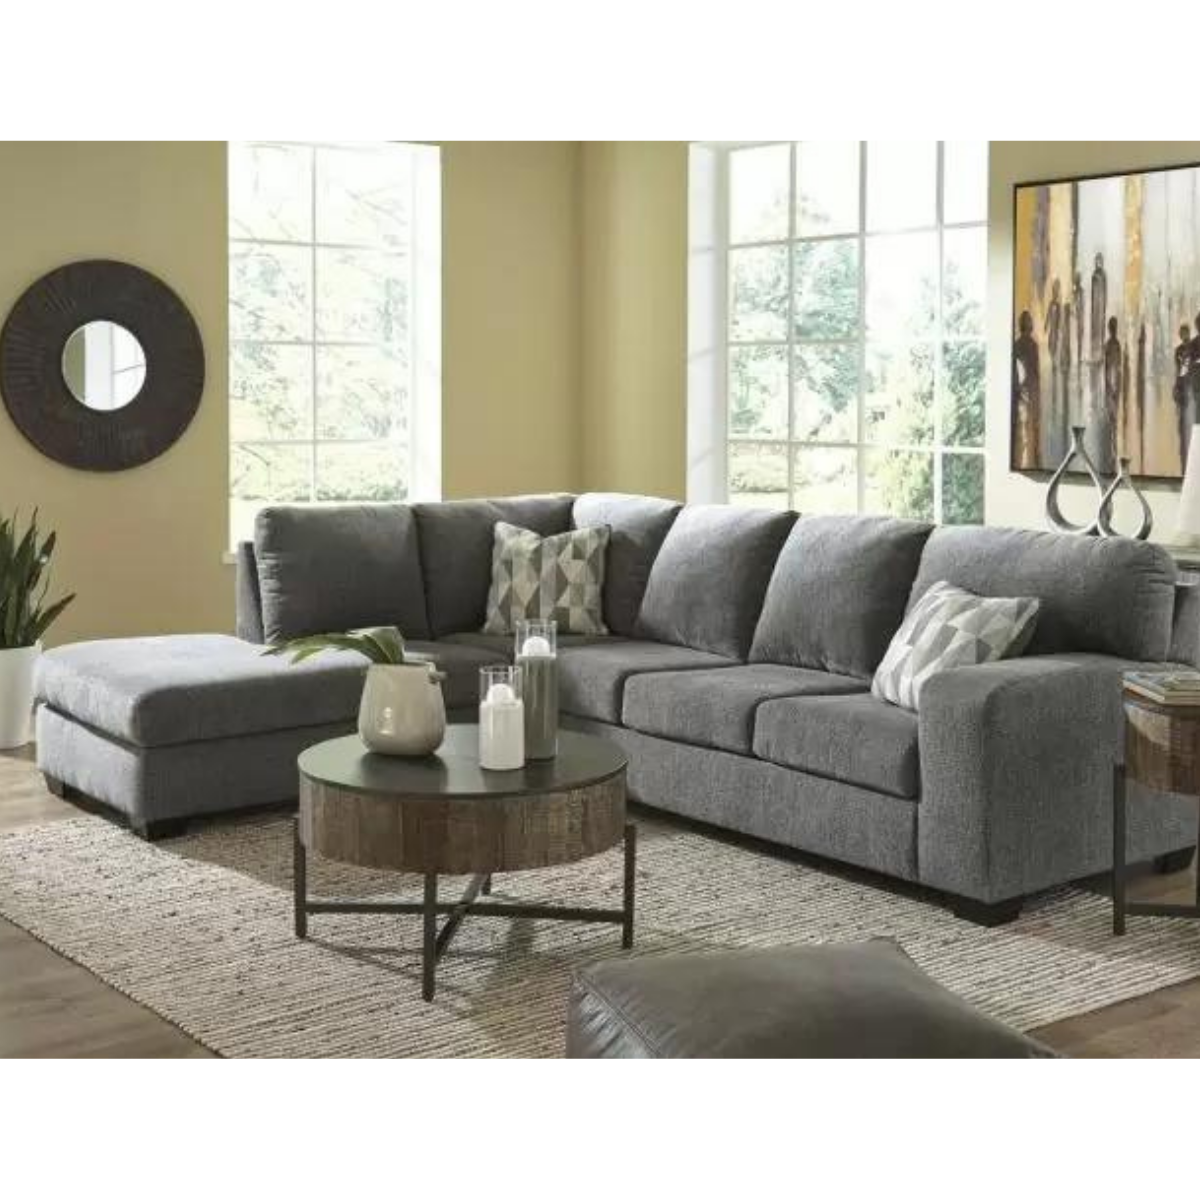 Ashley Dalhart 2 Piece Sectional with Chaise 8570316/67 $1250.00 90 Days Same as Cash*